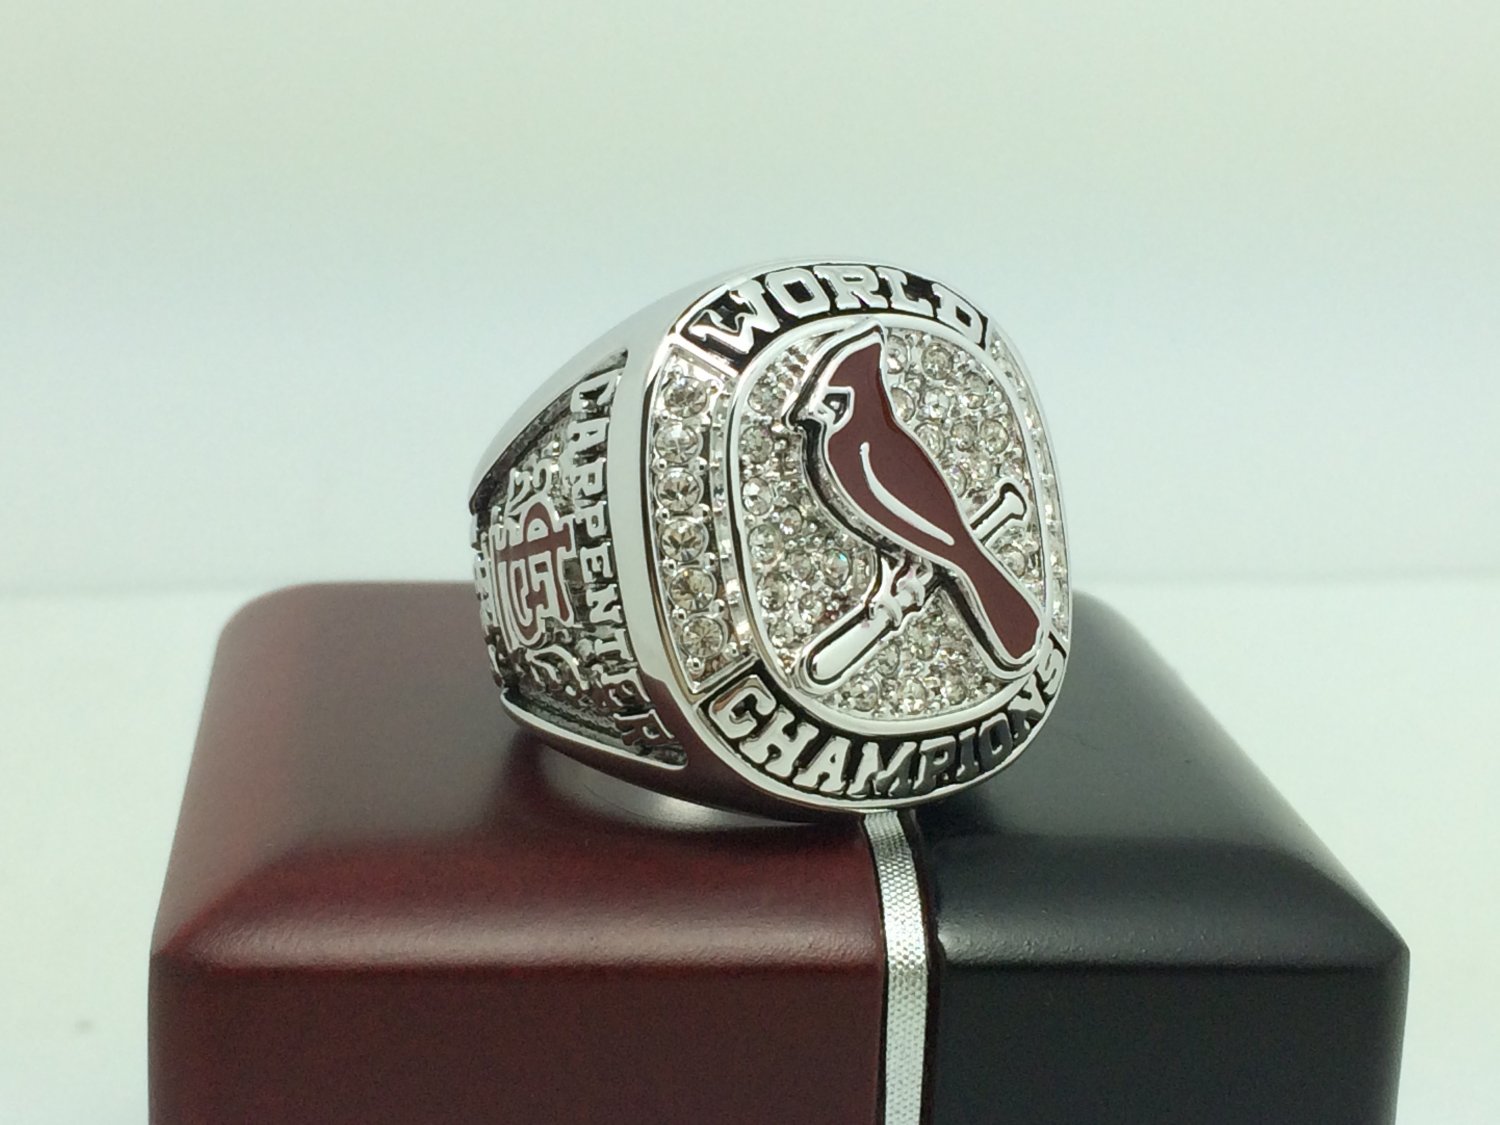 2011 St. Louis Cardinals world series Championship Ring 9-13 Size With wooden box